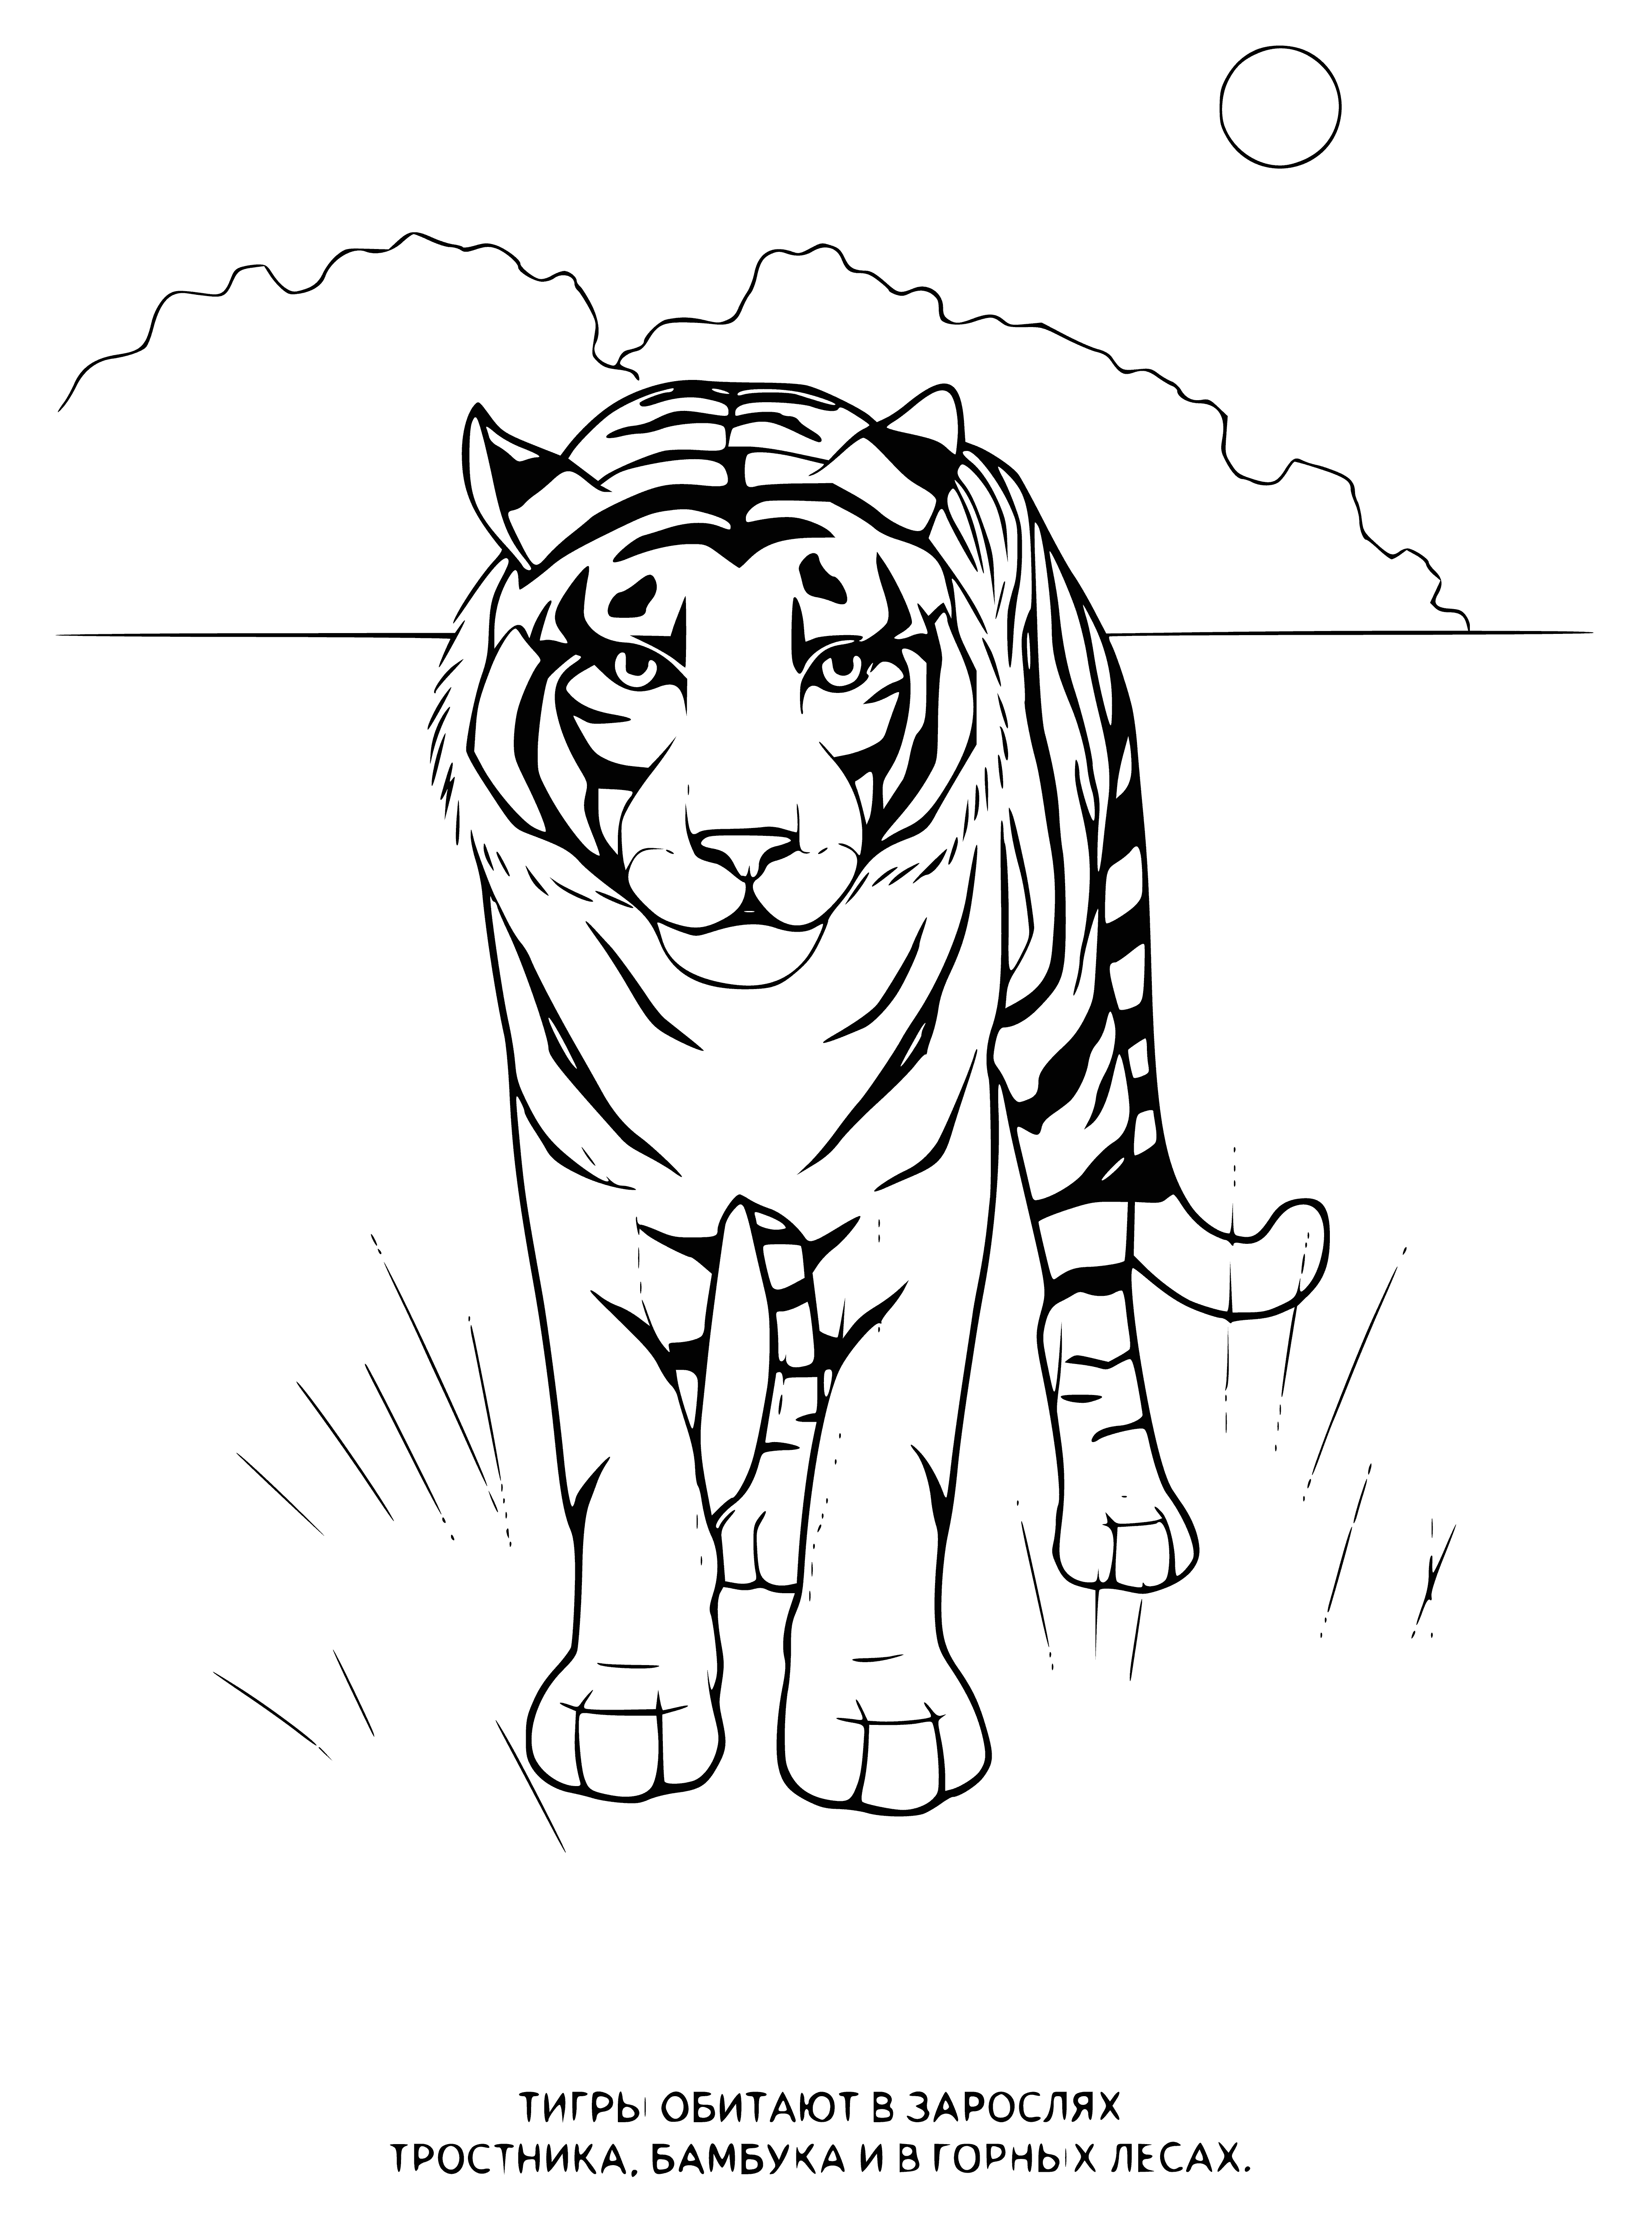 coloring page: Tigers are apex predators, loved for their iconic stripes. They're the largest cats and often called the 'king of the jungle'.